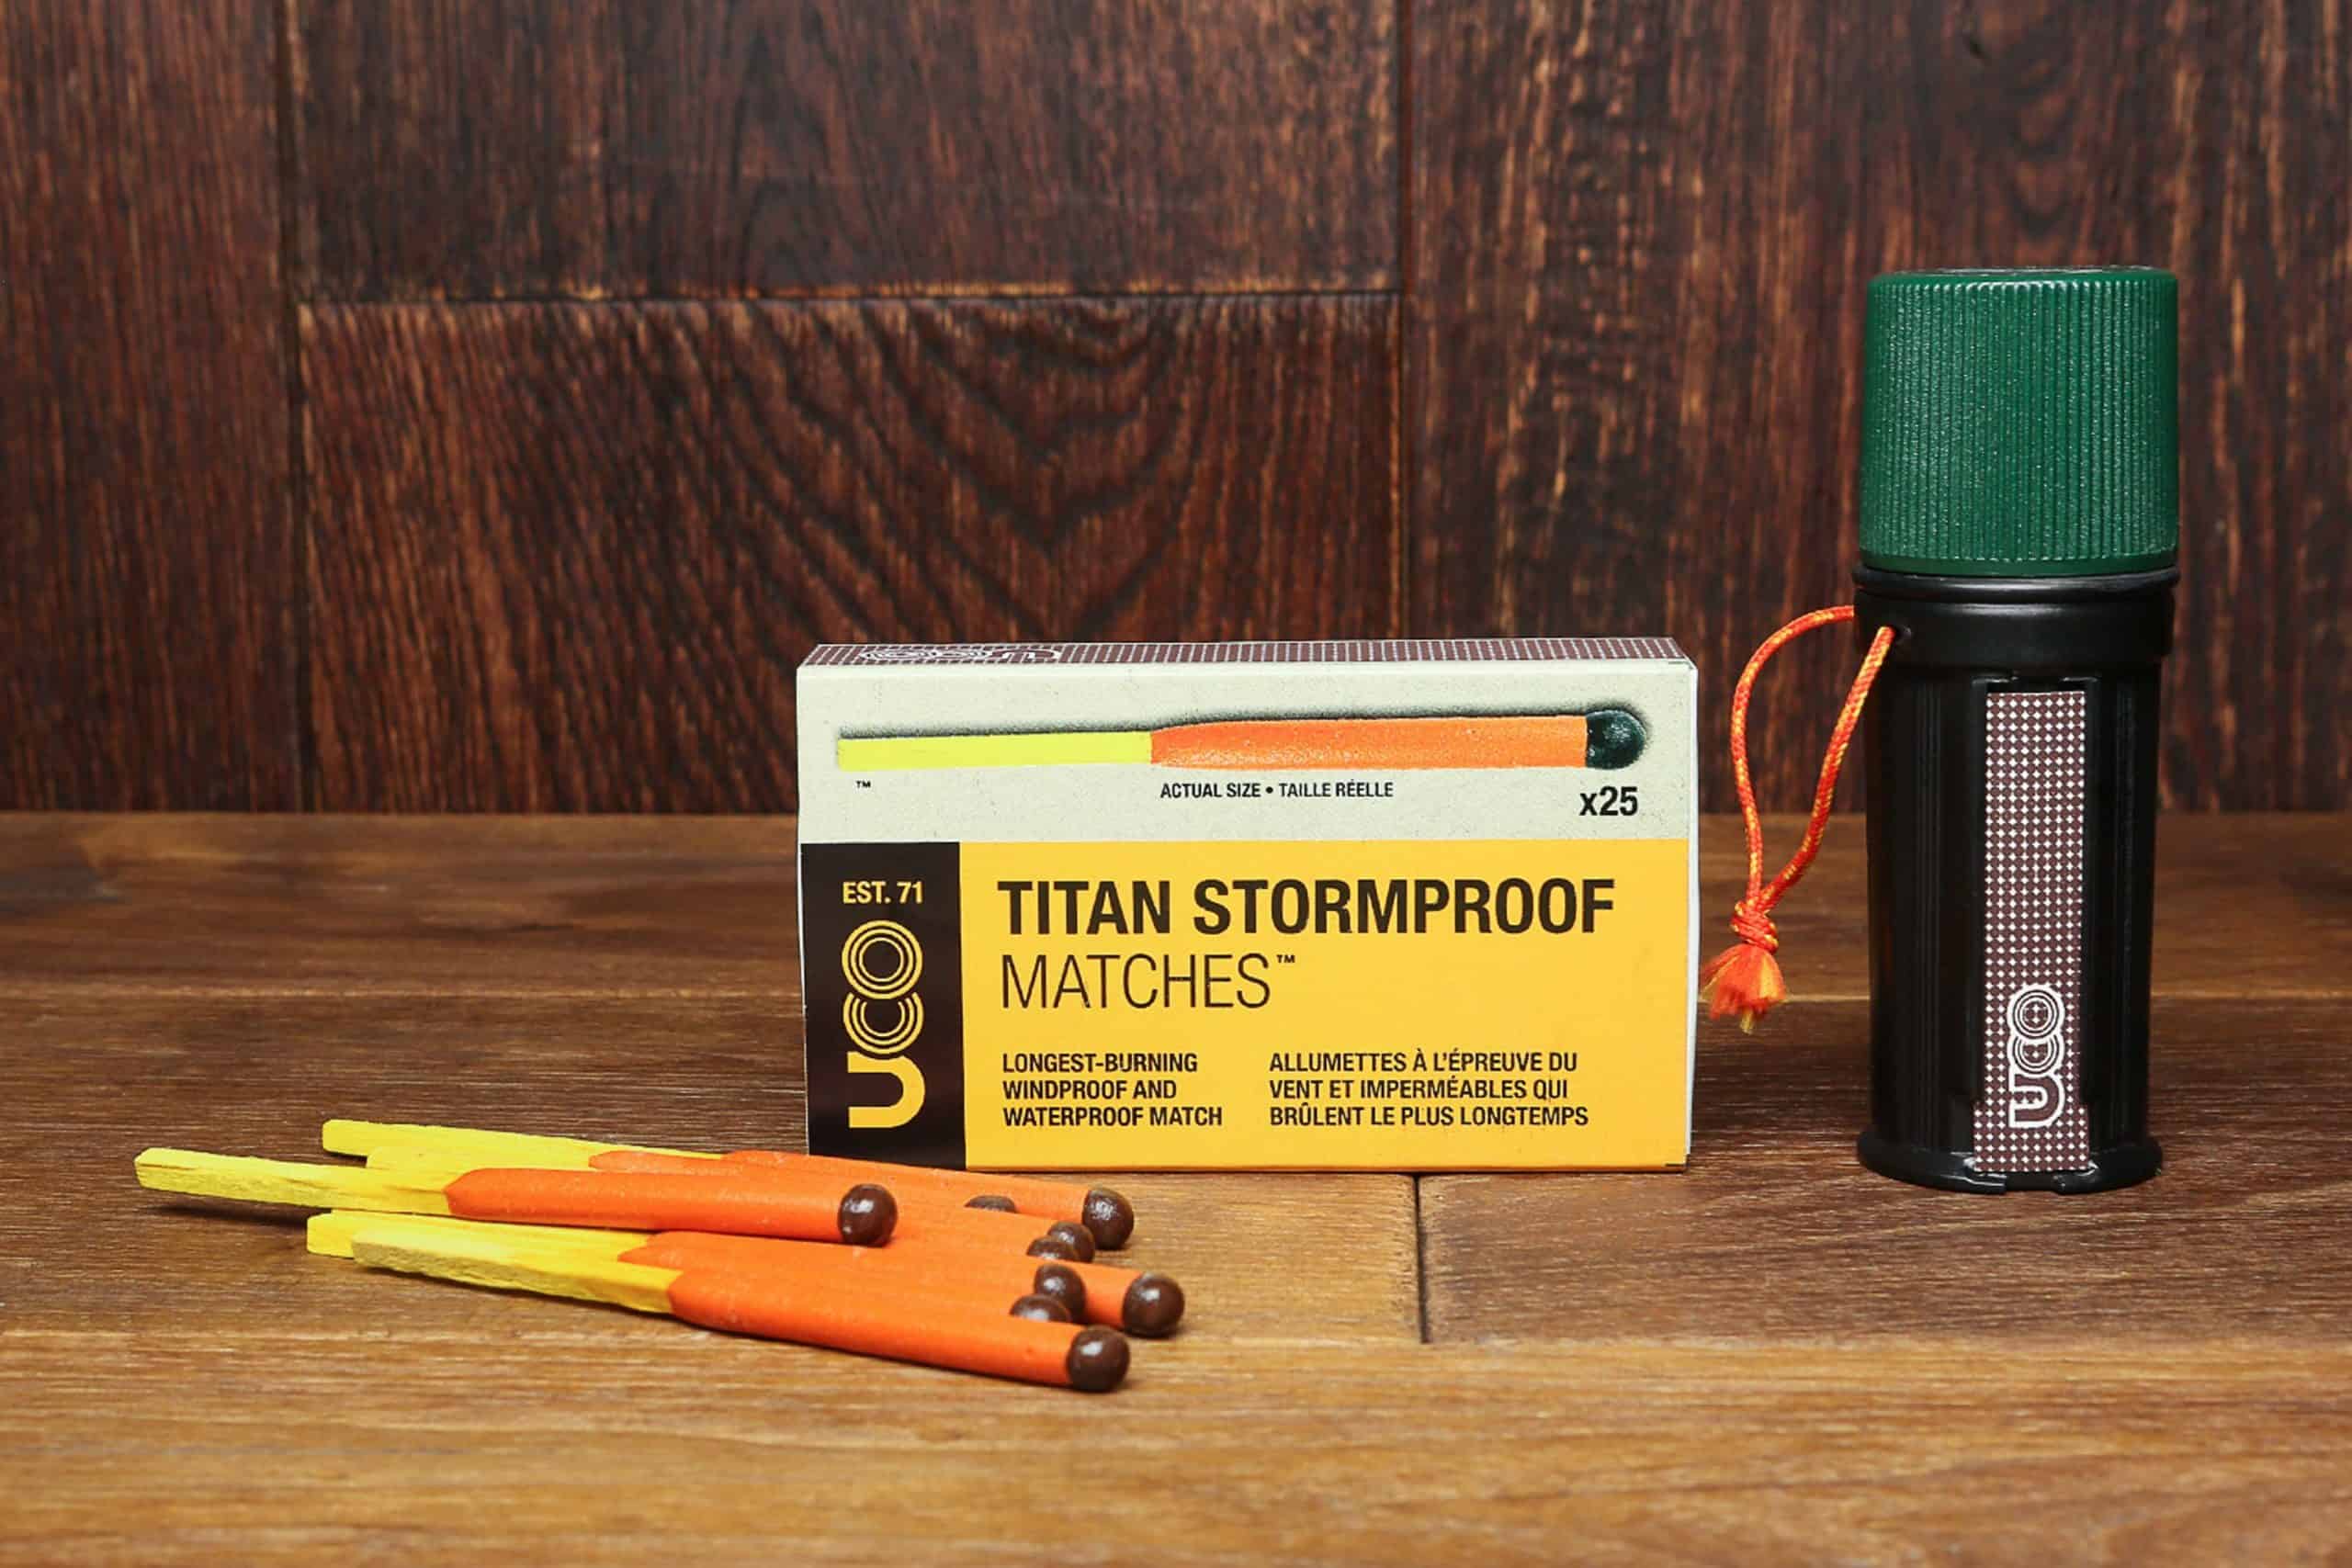 UCO Titan Stormproof Matches Review